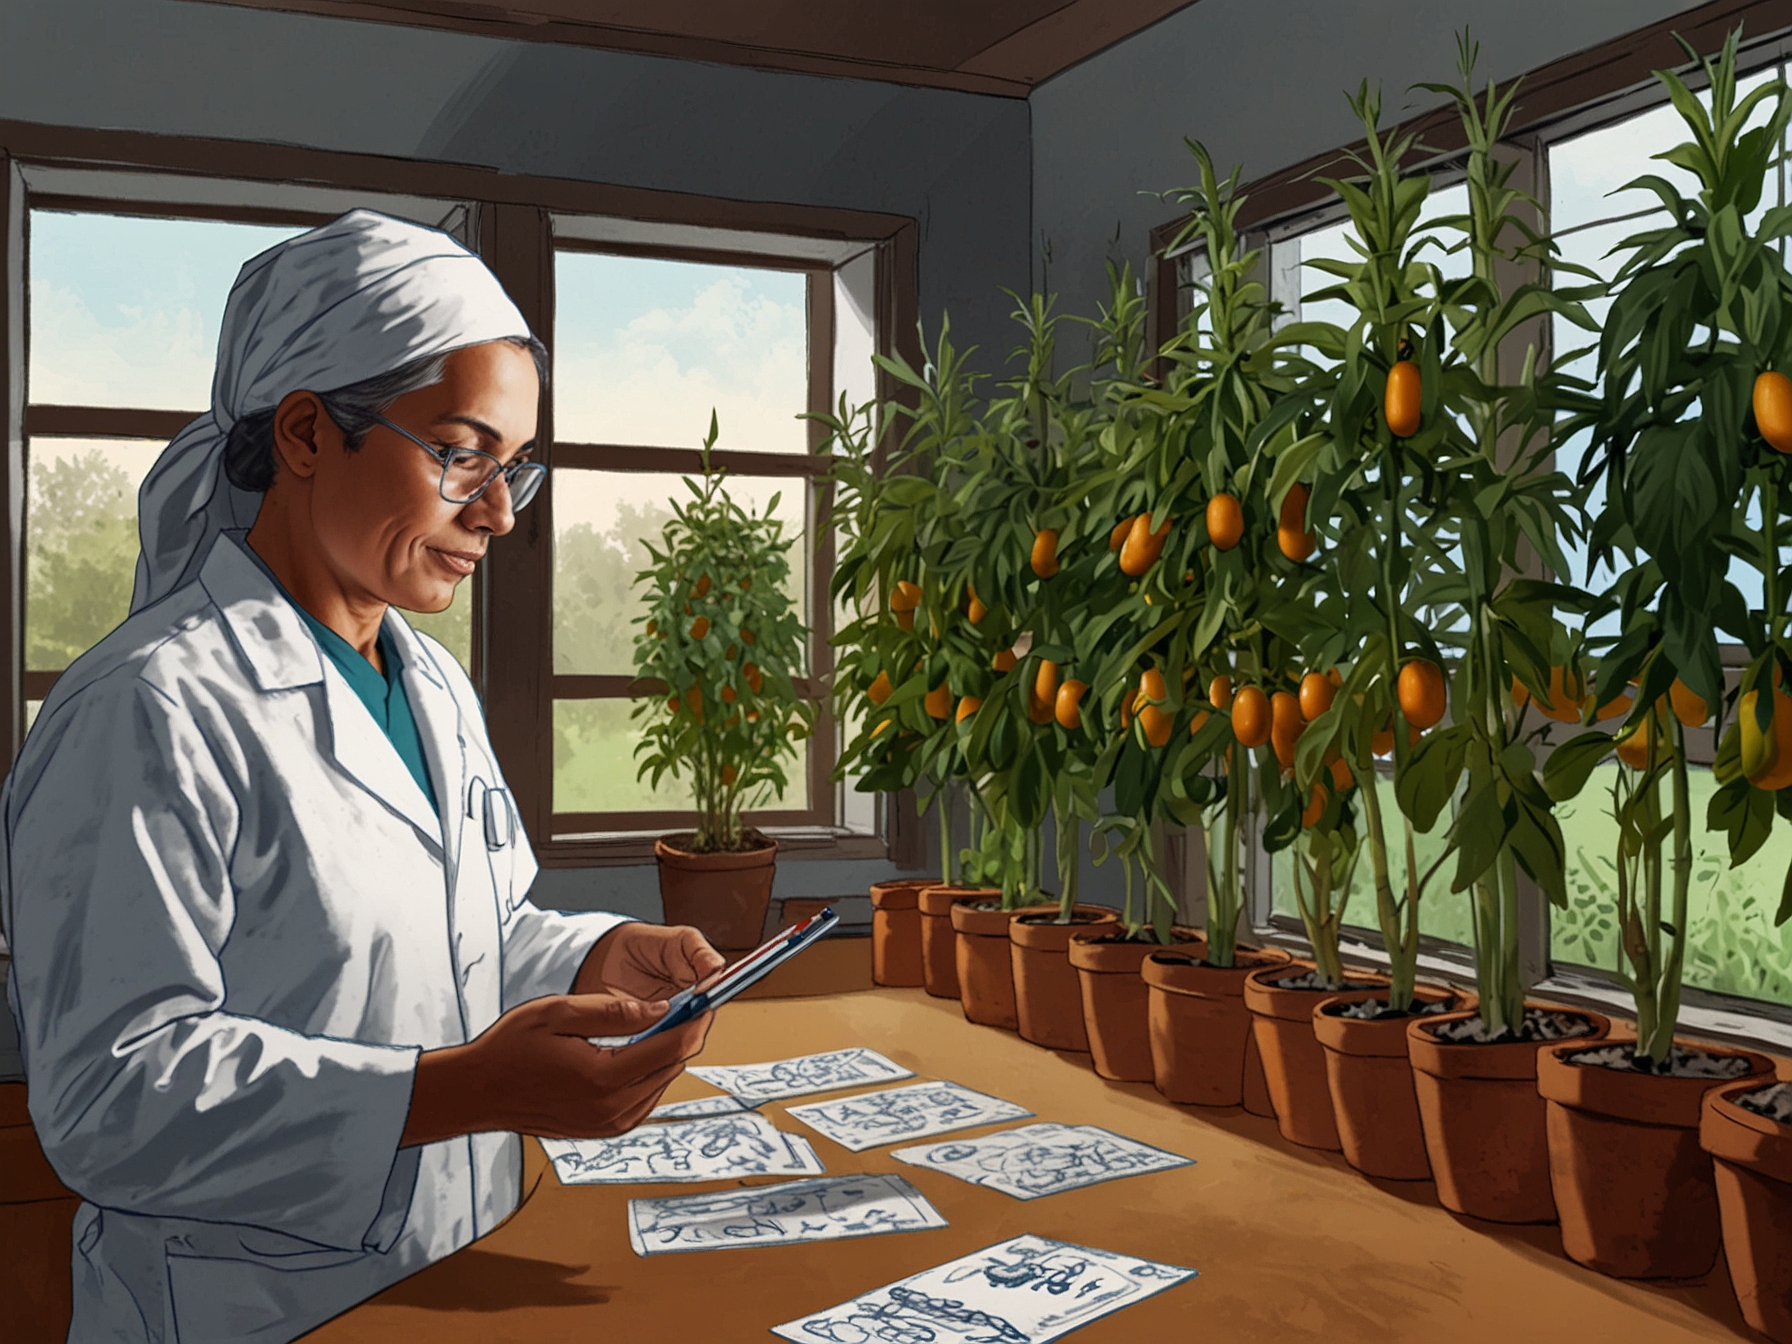 An illustration showcasing potential applications of seekRNA in medicine, agriculture, and biotechnology, emphasizing enhanced crop traits and personalized gene therapies.